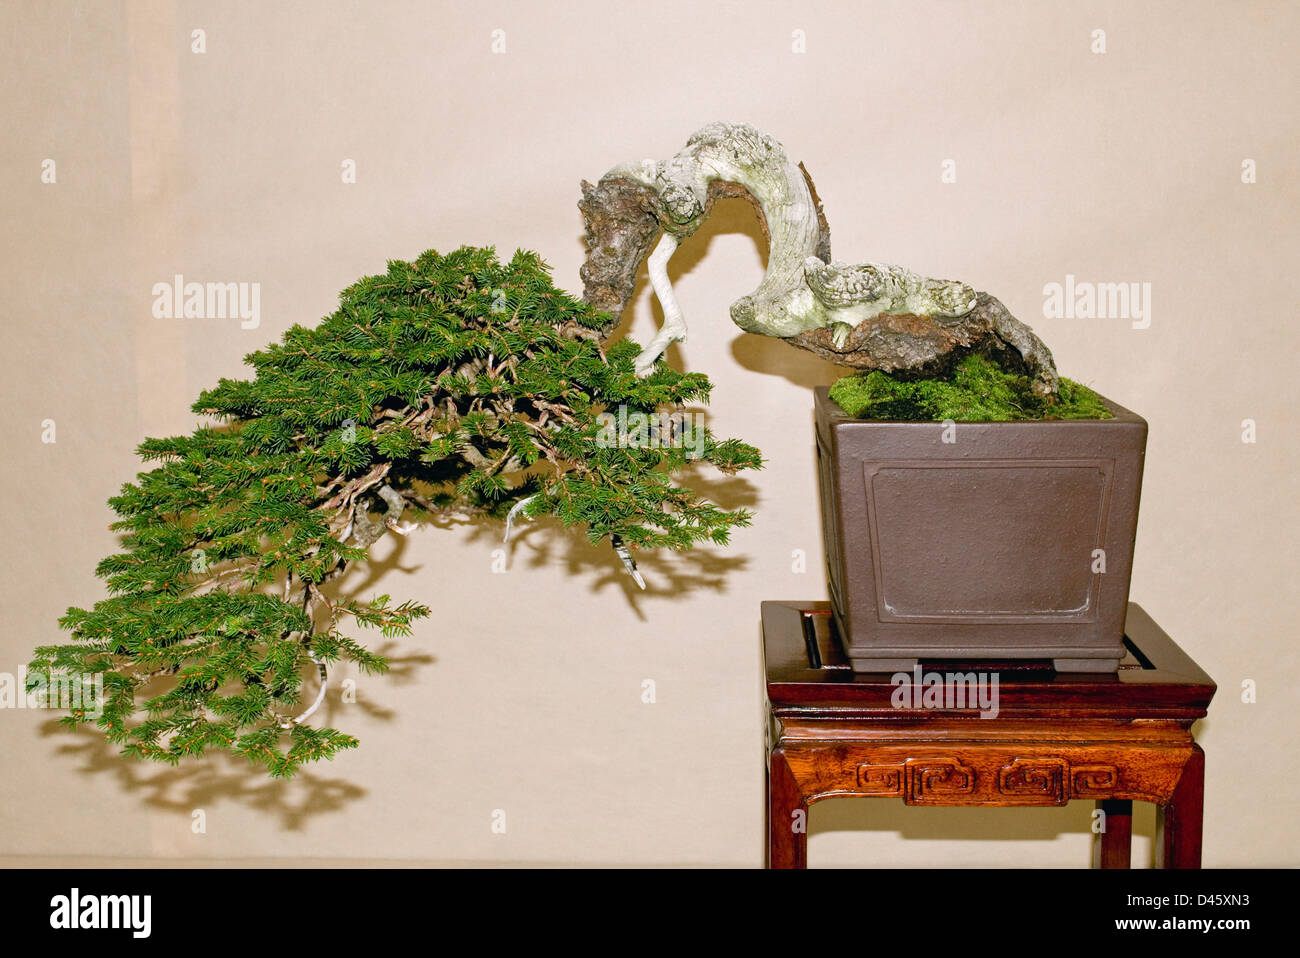 Picea Excelsa or Picea abies (Norway spruce) bonsai Stock Photo